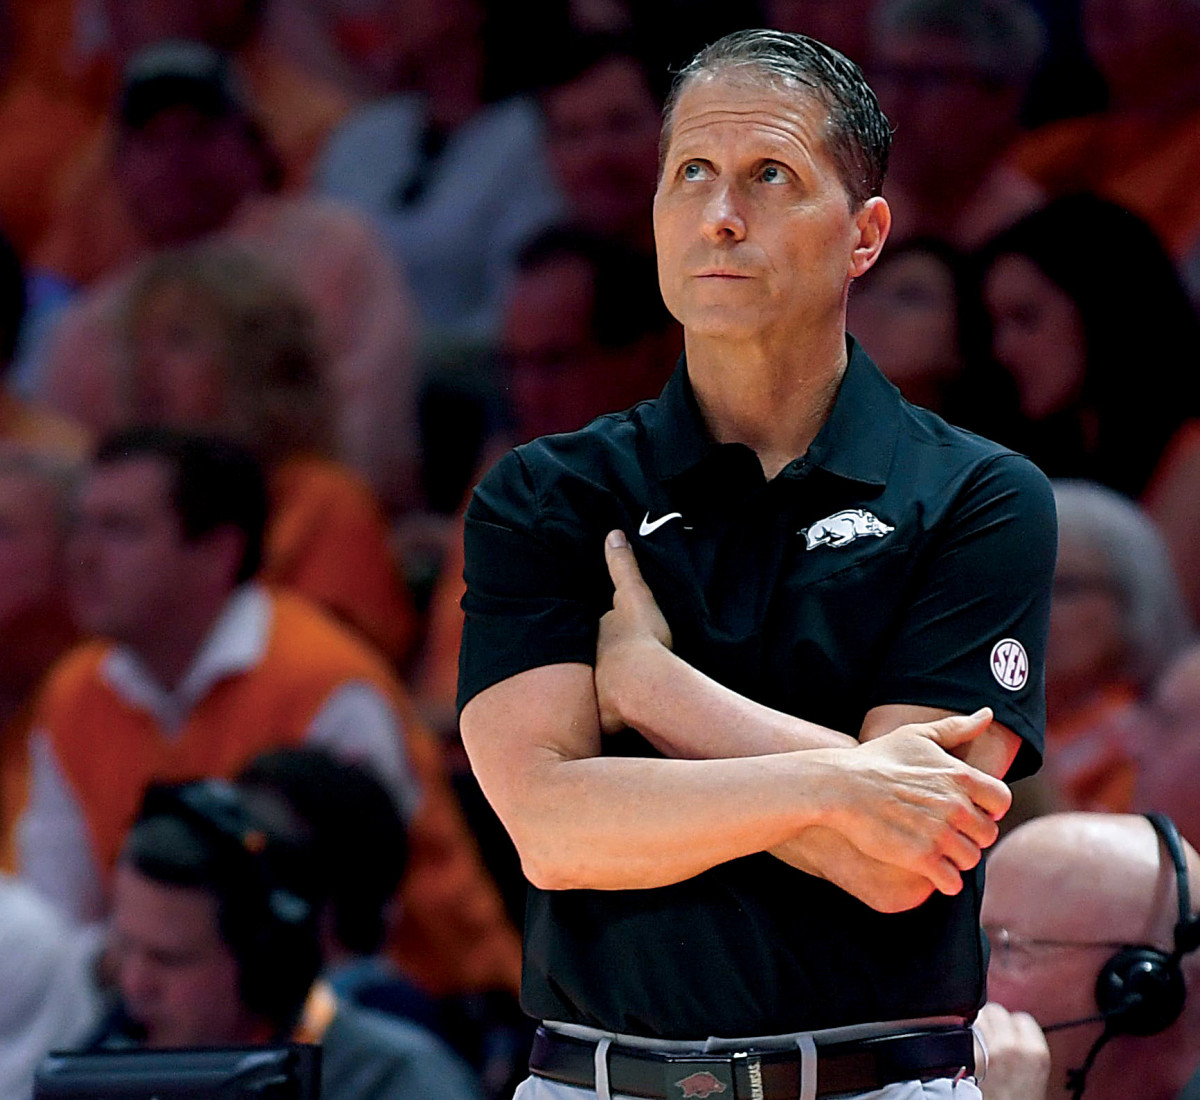 Arkansas head coach Eric Musselman stands on the sidelines during the final regular season game between Tennessee and Arkansas at Thompson-Boling Arena in Knoxville.